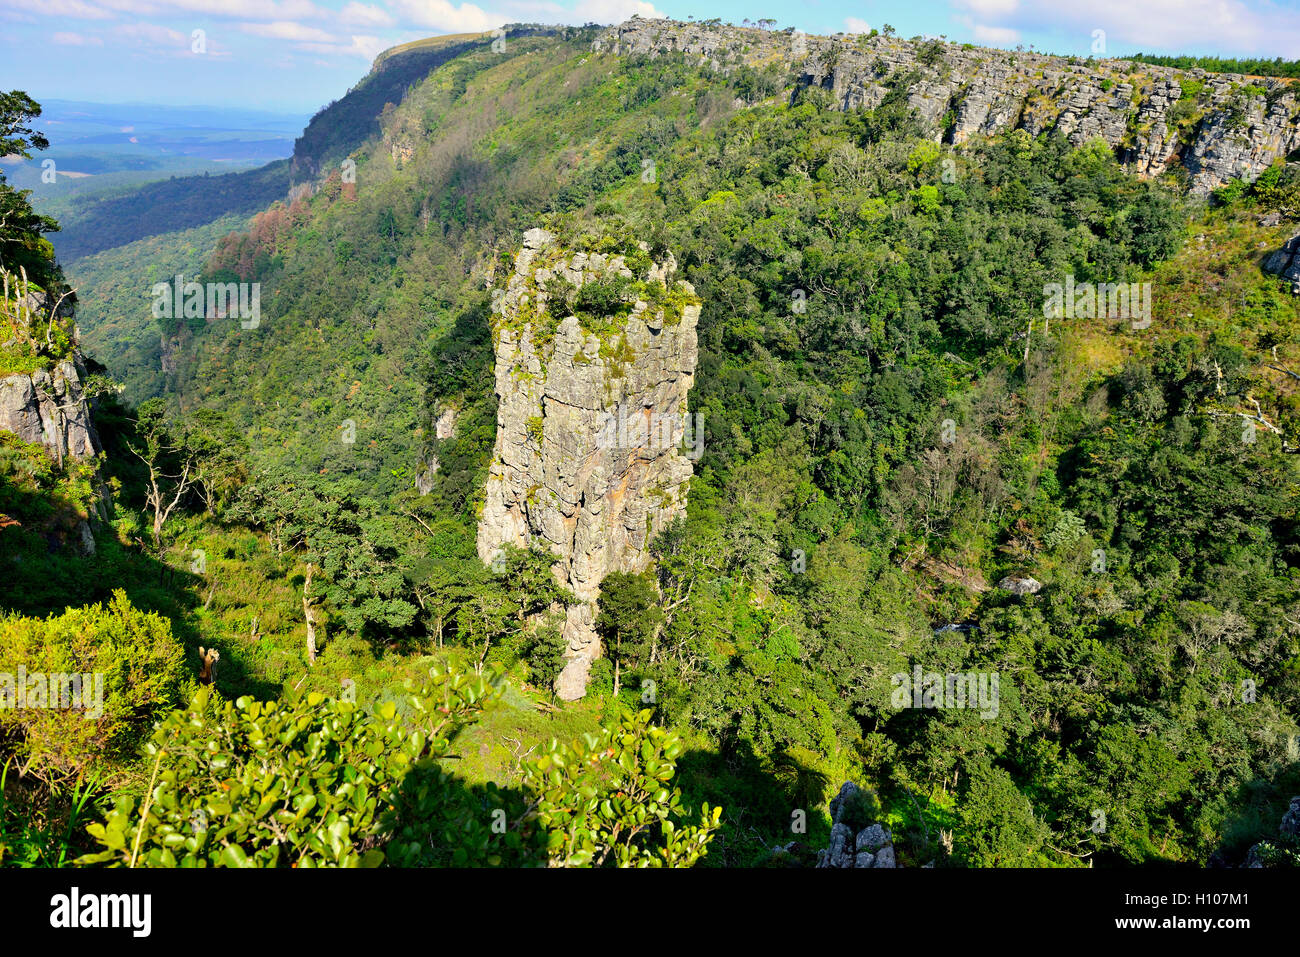 The Pinnacle Rock, a tower-like freestanding quartzite buttress which rises 30 m above the dense indigenous forest around Graskop, South Africa Stock Photo